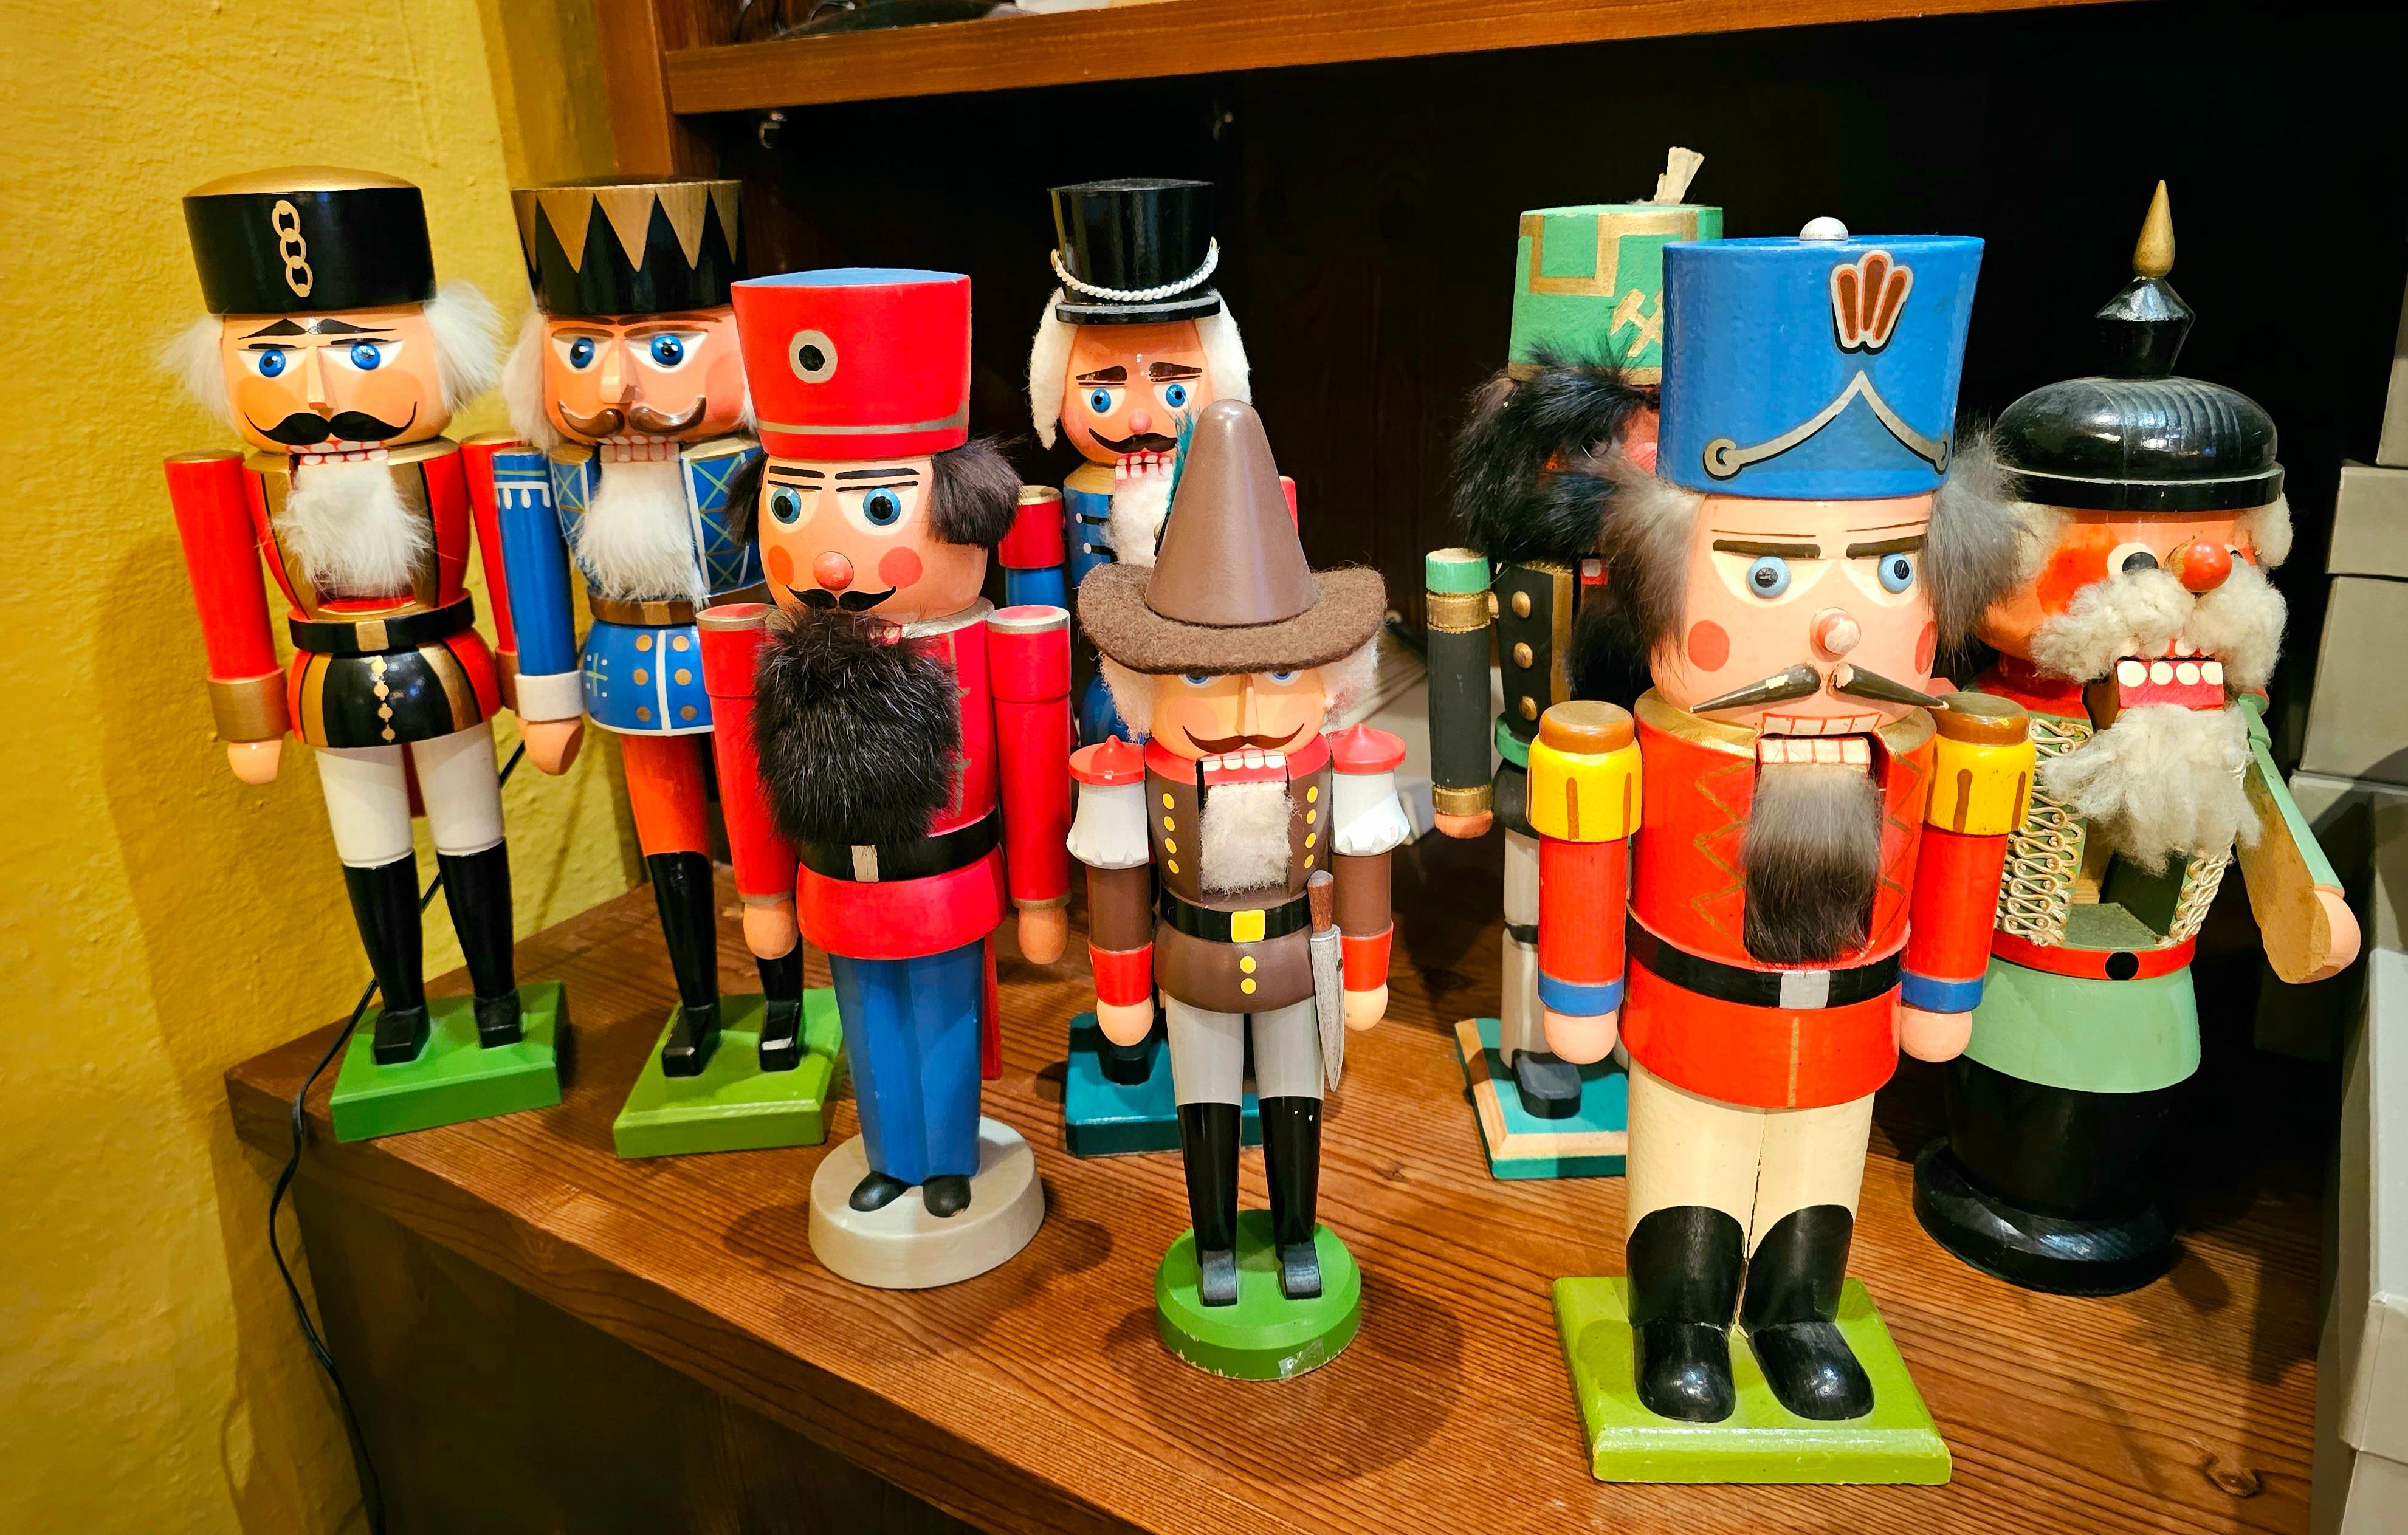 Folk Art vintage wooden nutcracker figure from the Erzgebirge. The region Erzgebirge formerly Eastern Germany is famous for this special kind of nutcrackers, where intricate carving has been their home. Completely hand-painted in red and blue colors